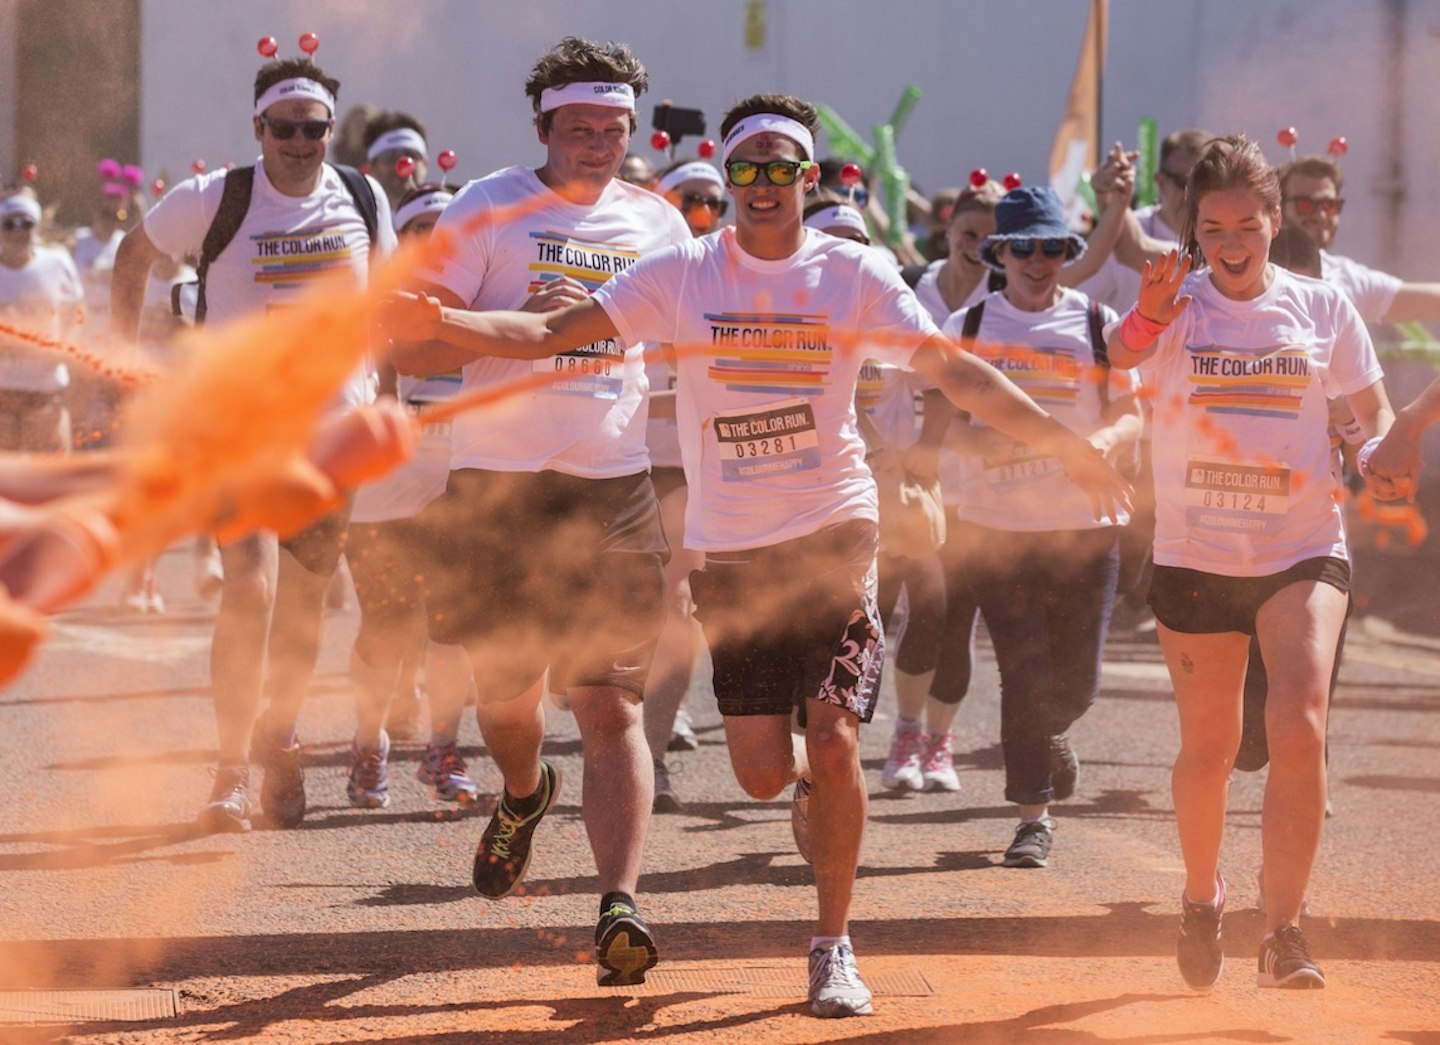 The 5K Color Run has become a global sensation